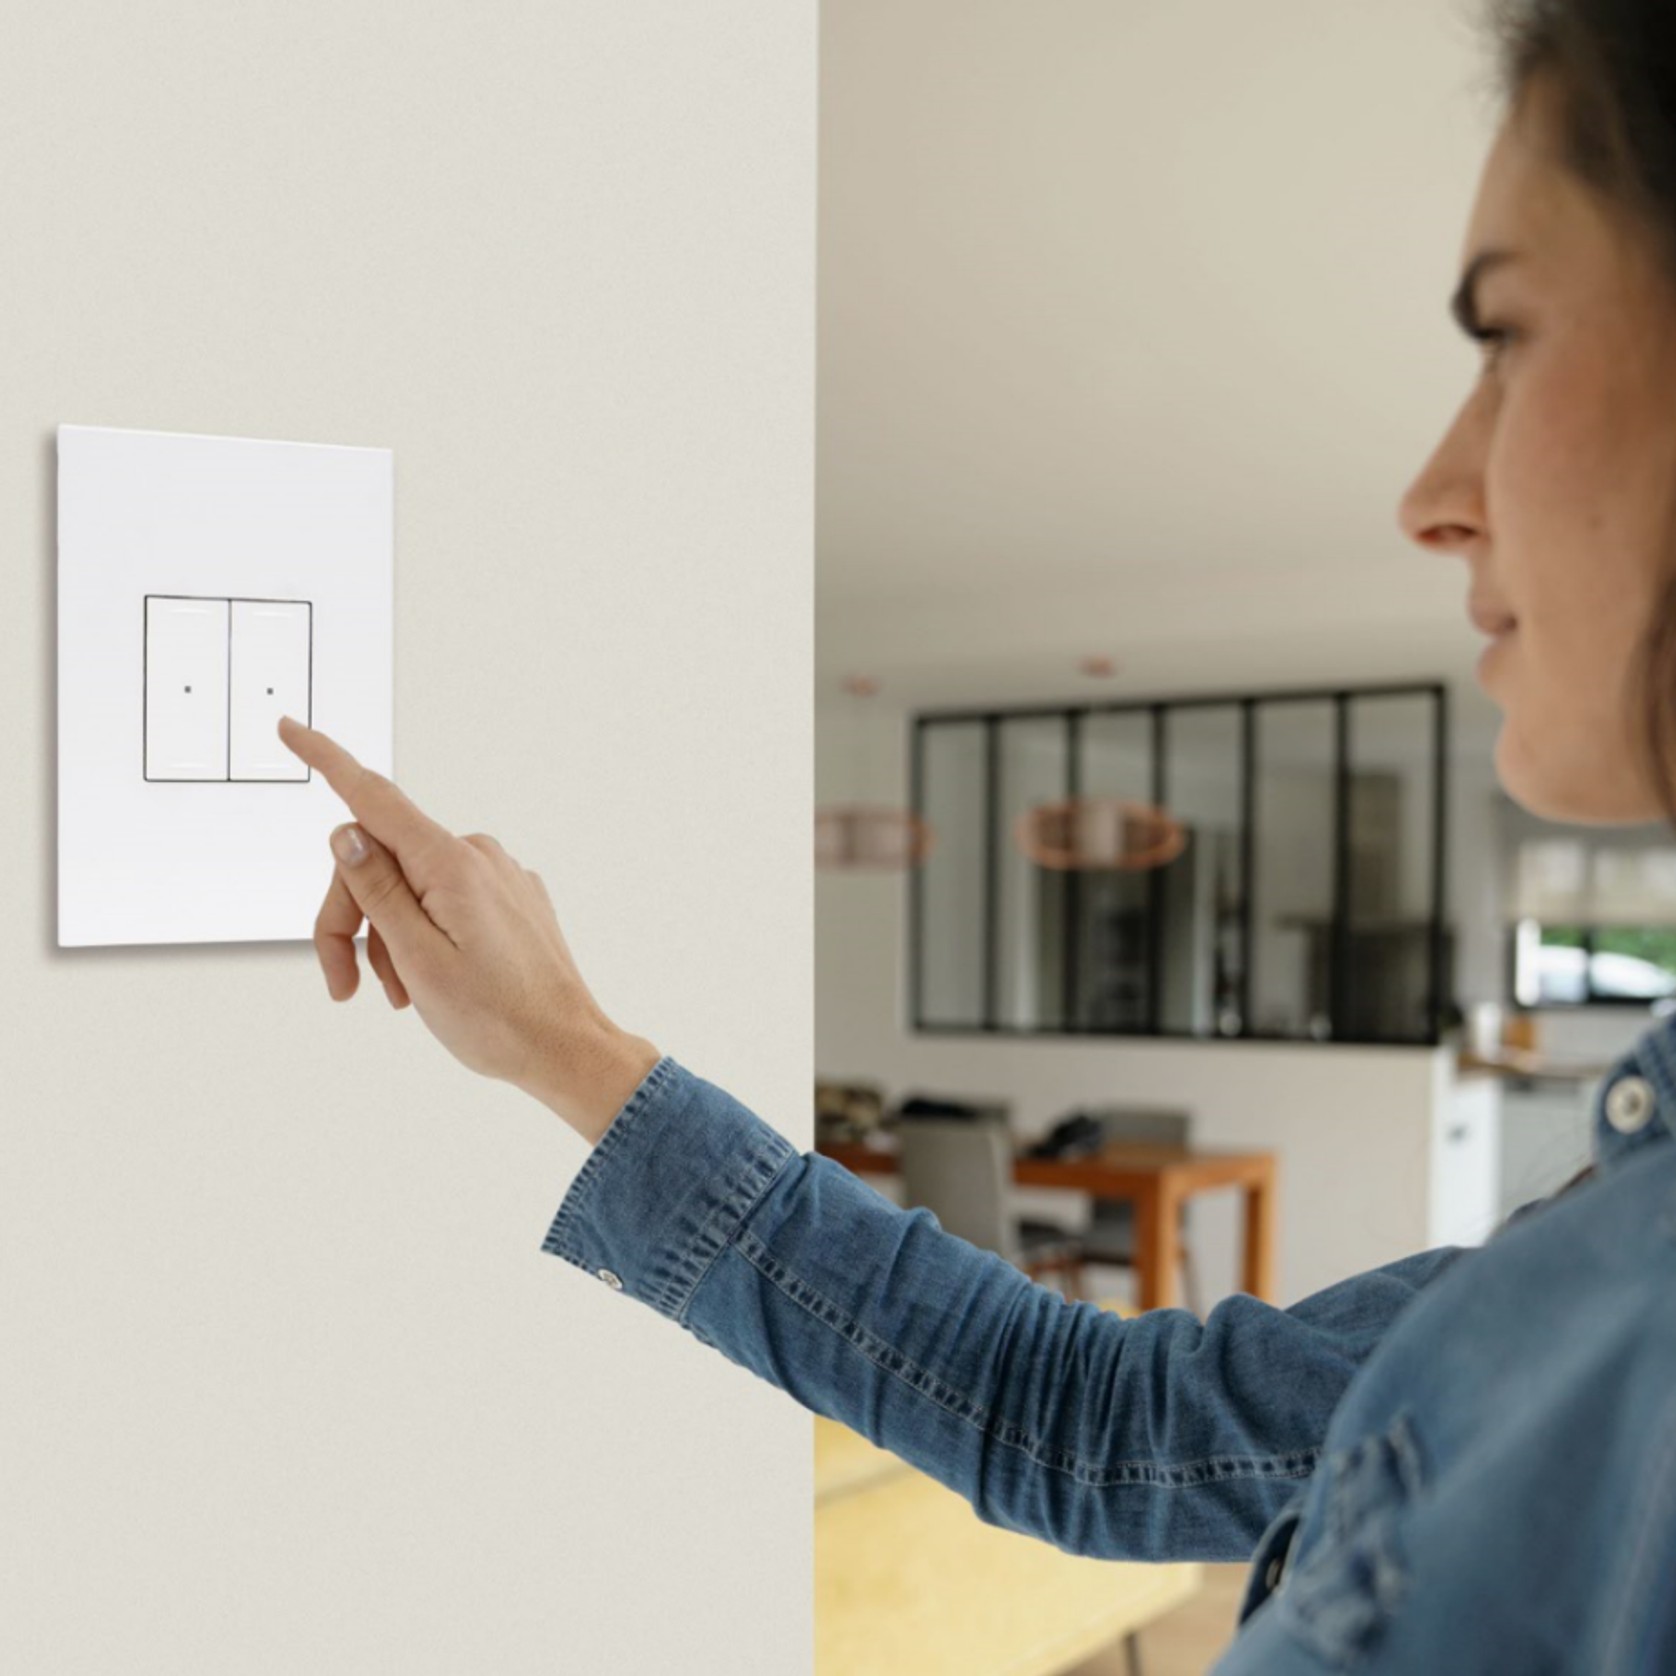 Arteor with Netatmo Smart Home Solution gallery detail image